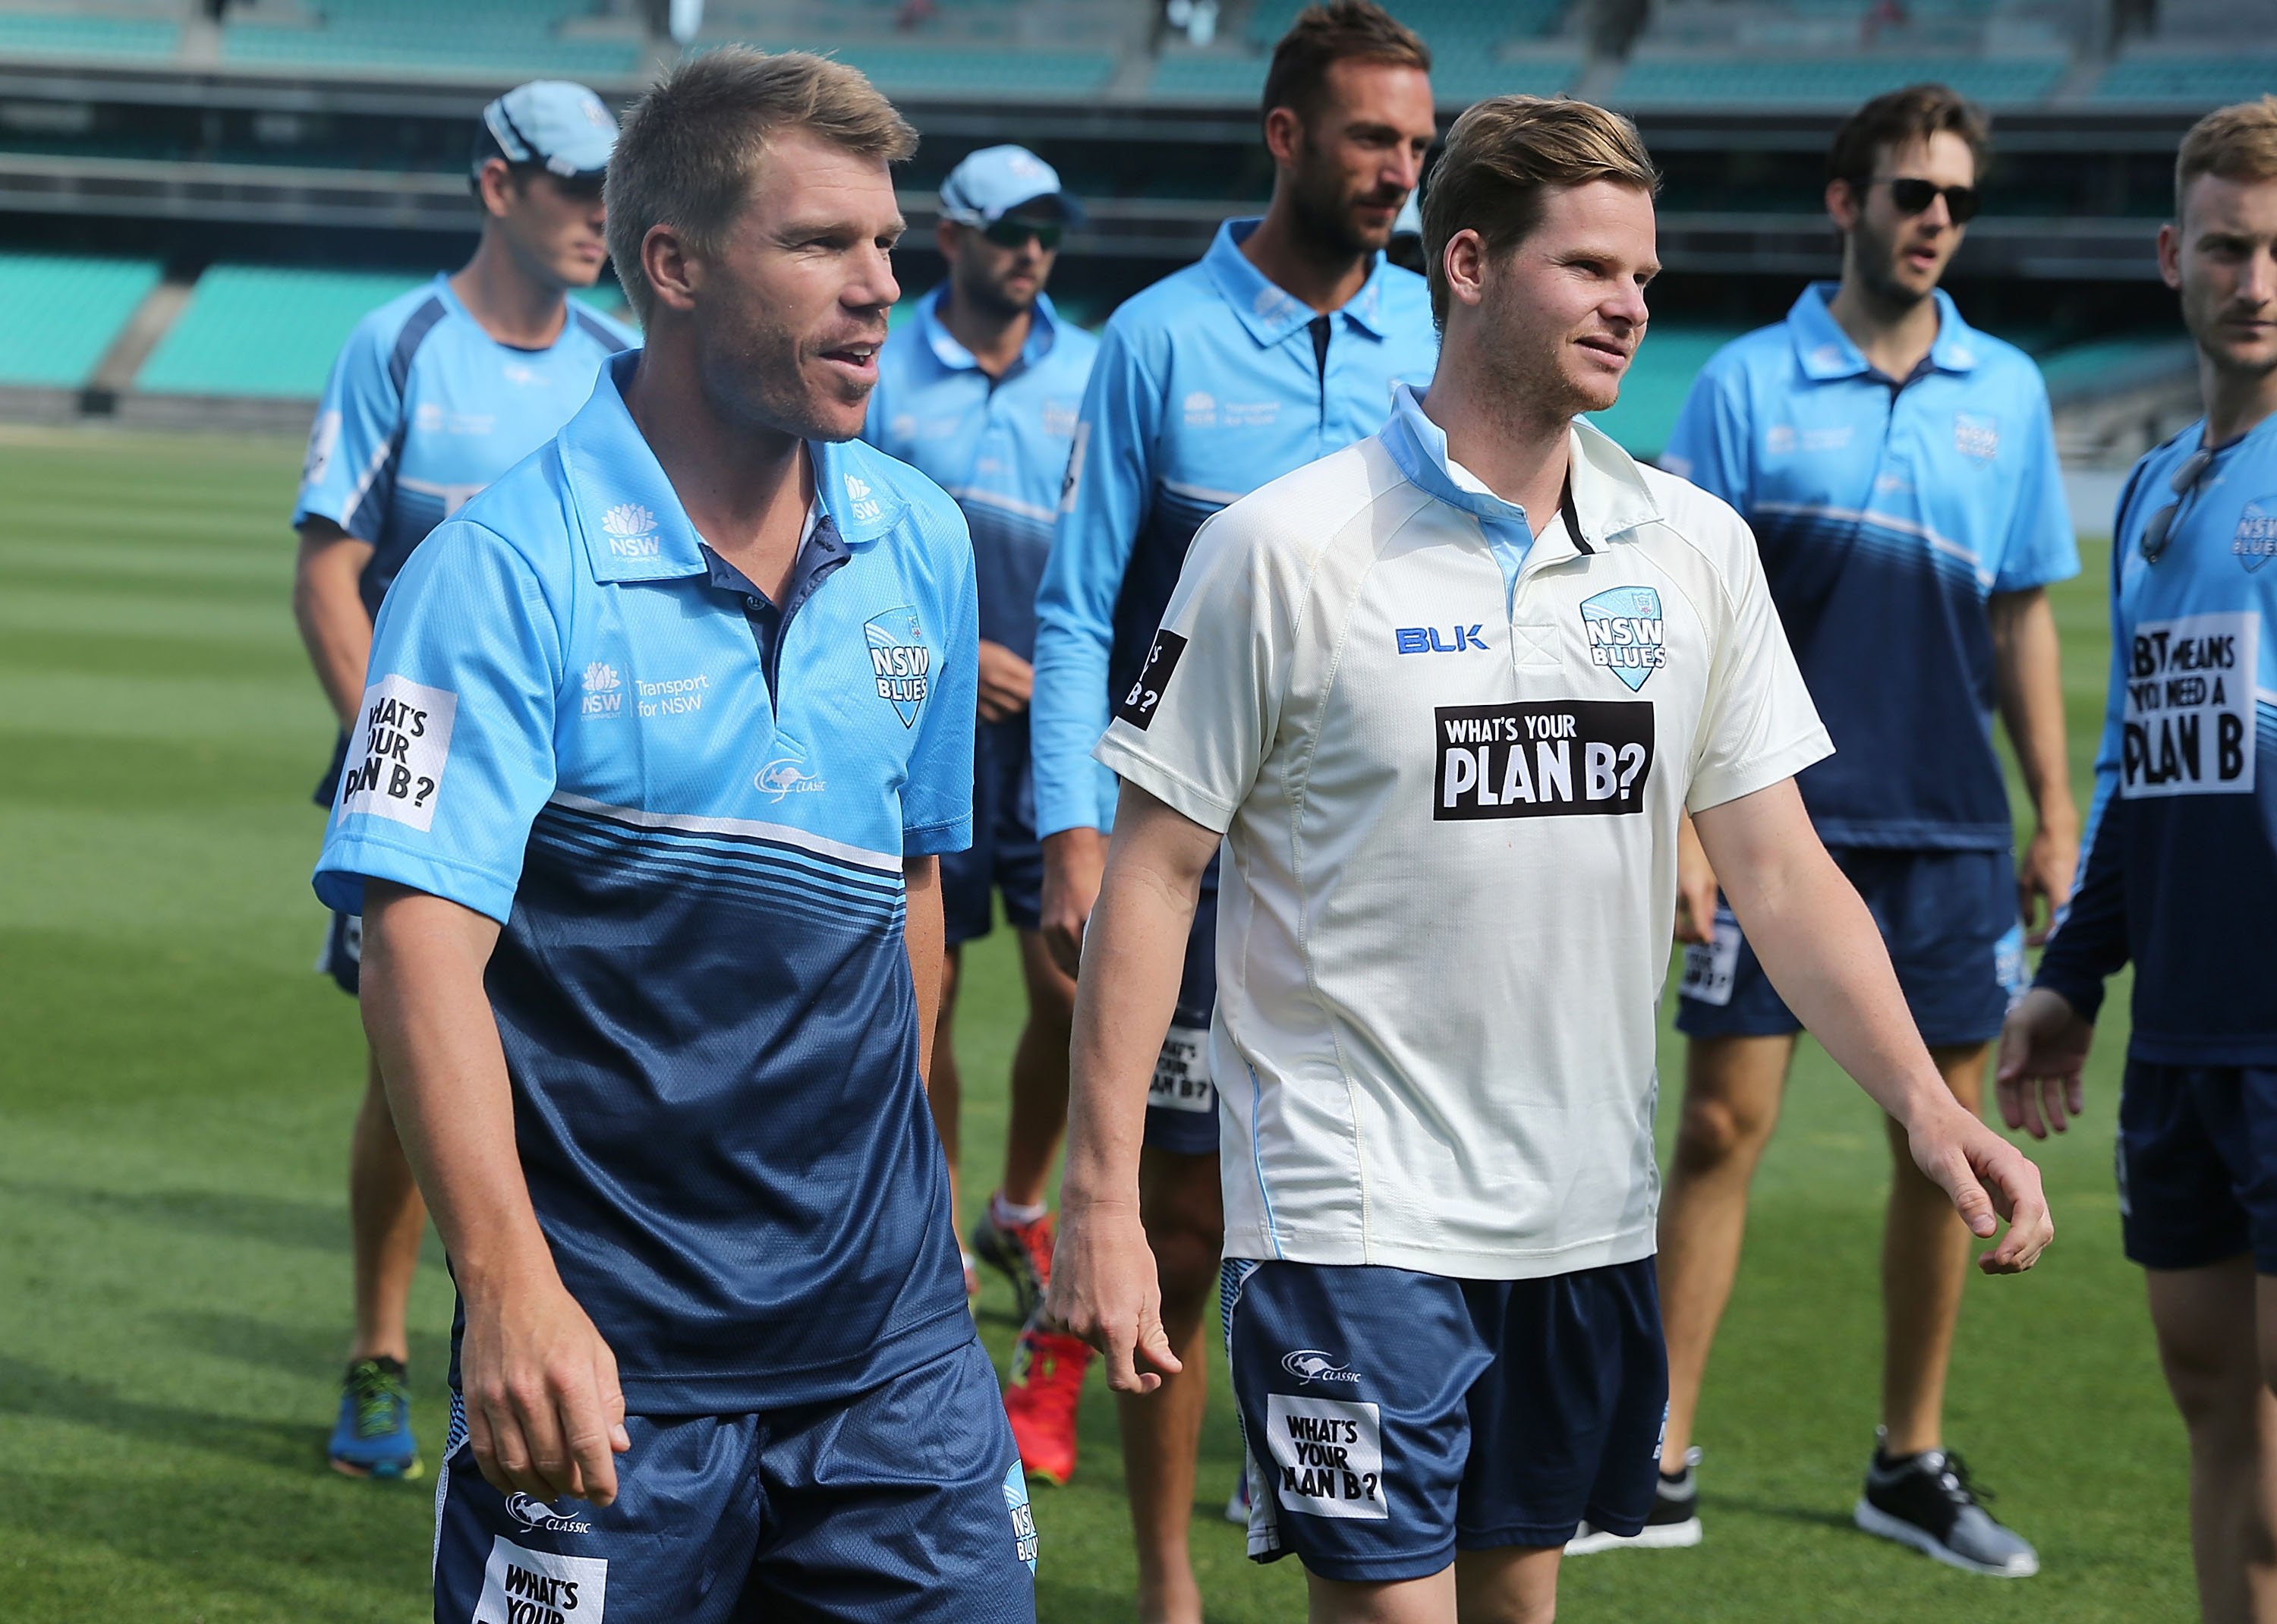 Great to see David Warner back in the Blues’ outfit after the rehabilitation, states Phil Jacques